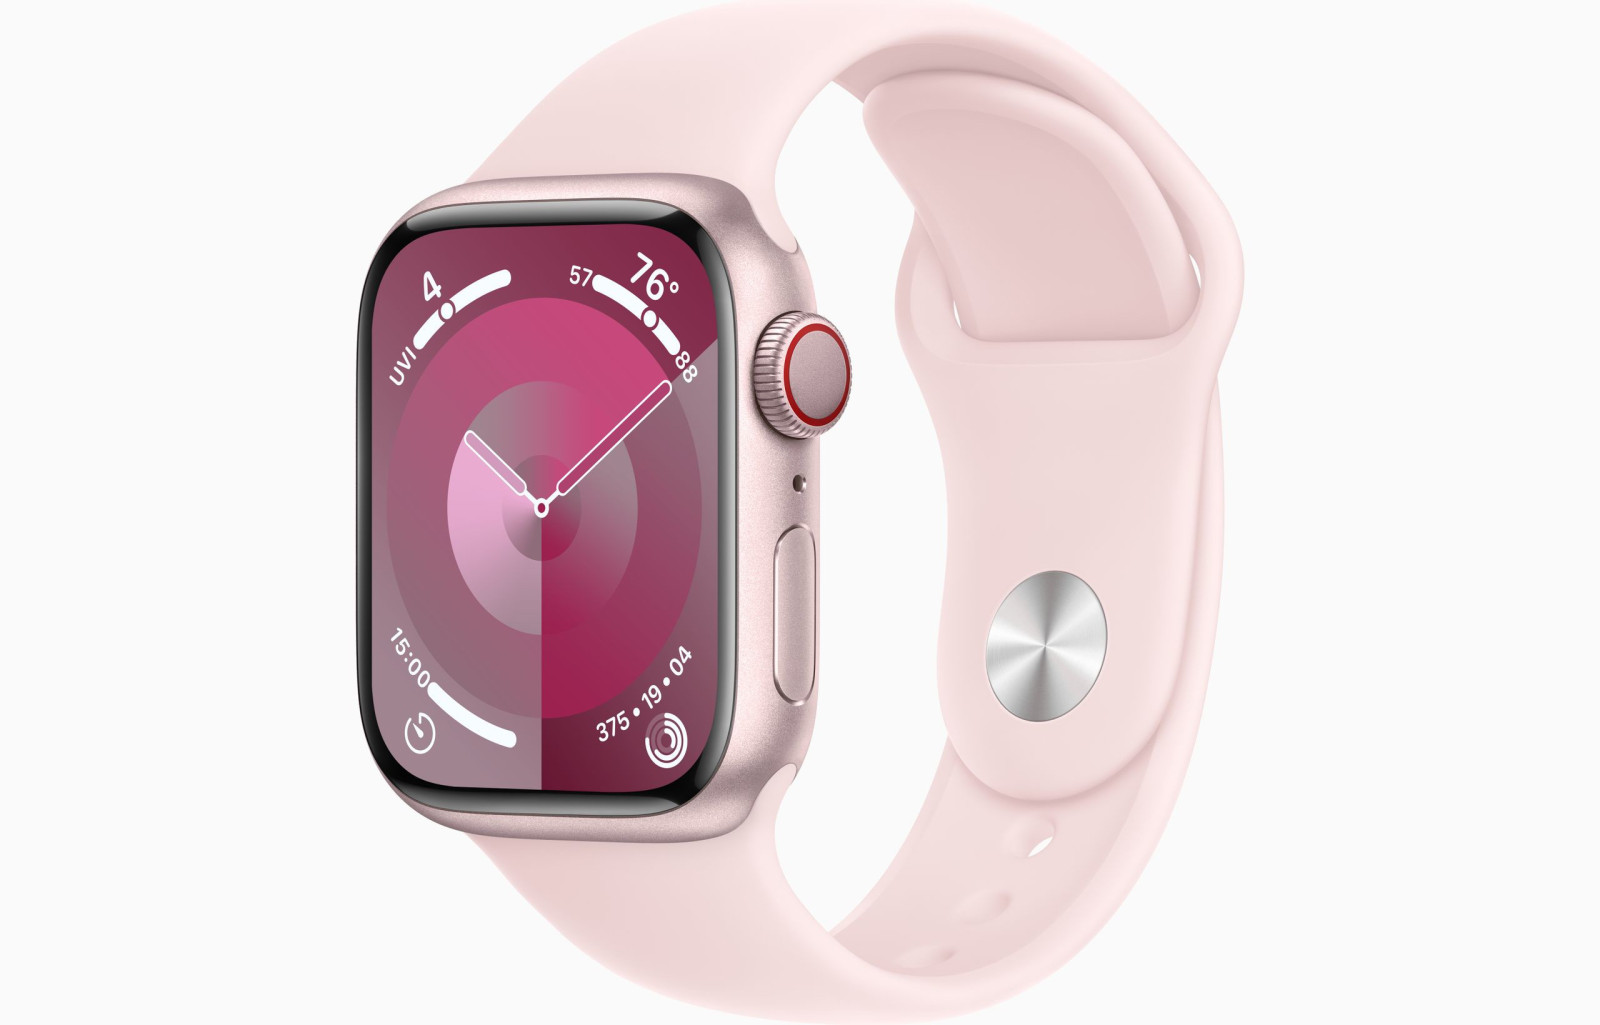 Apple Watch S9 Cell/45mm/Pink/Šport Band/Light Pink/-S/M